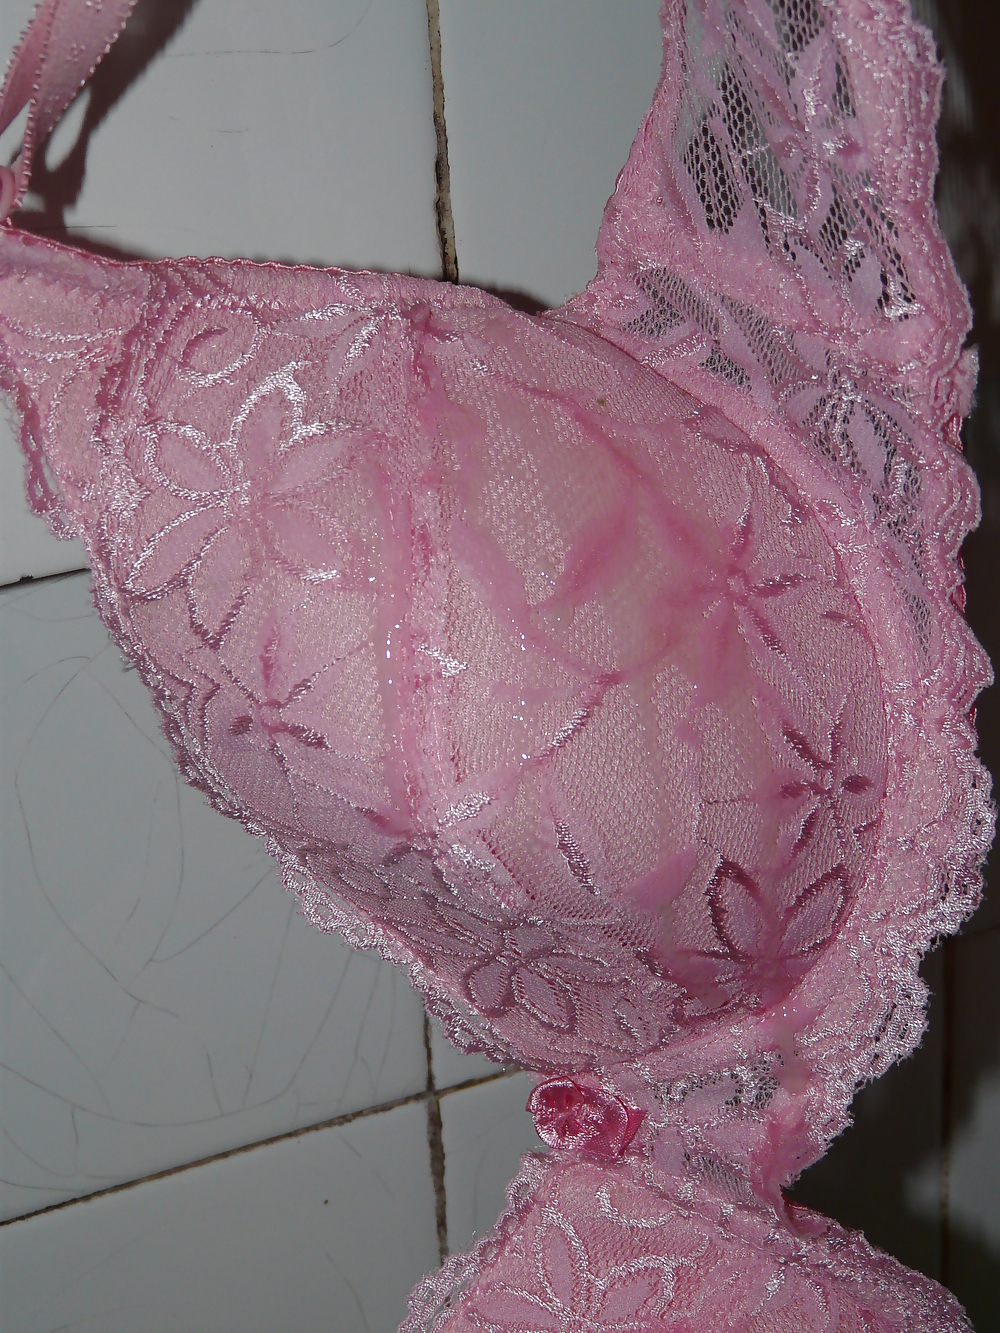 My mom's pink bra. porn pictures